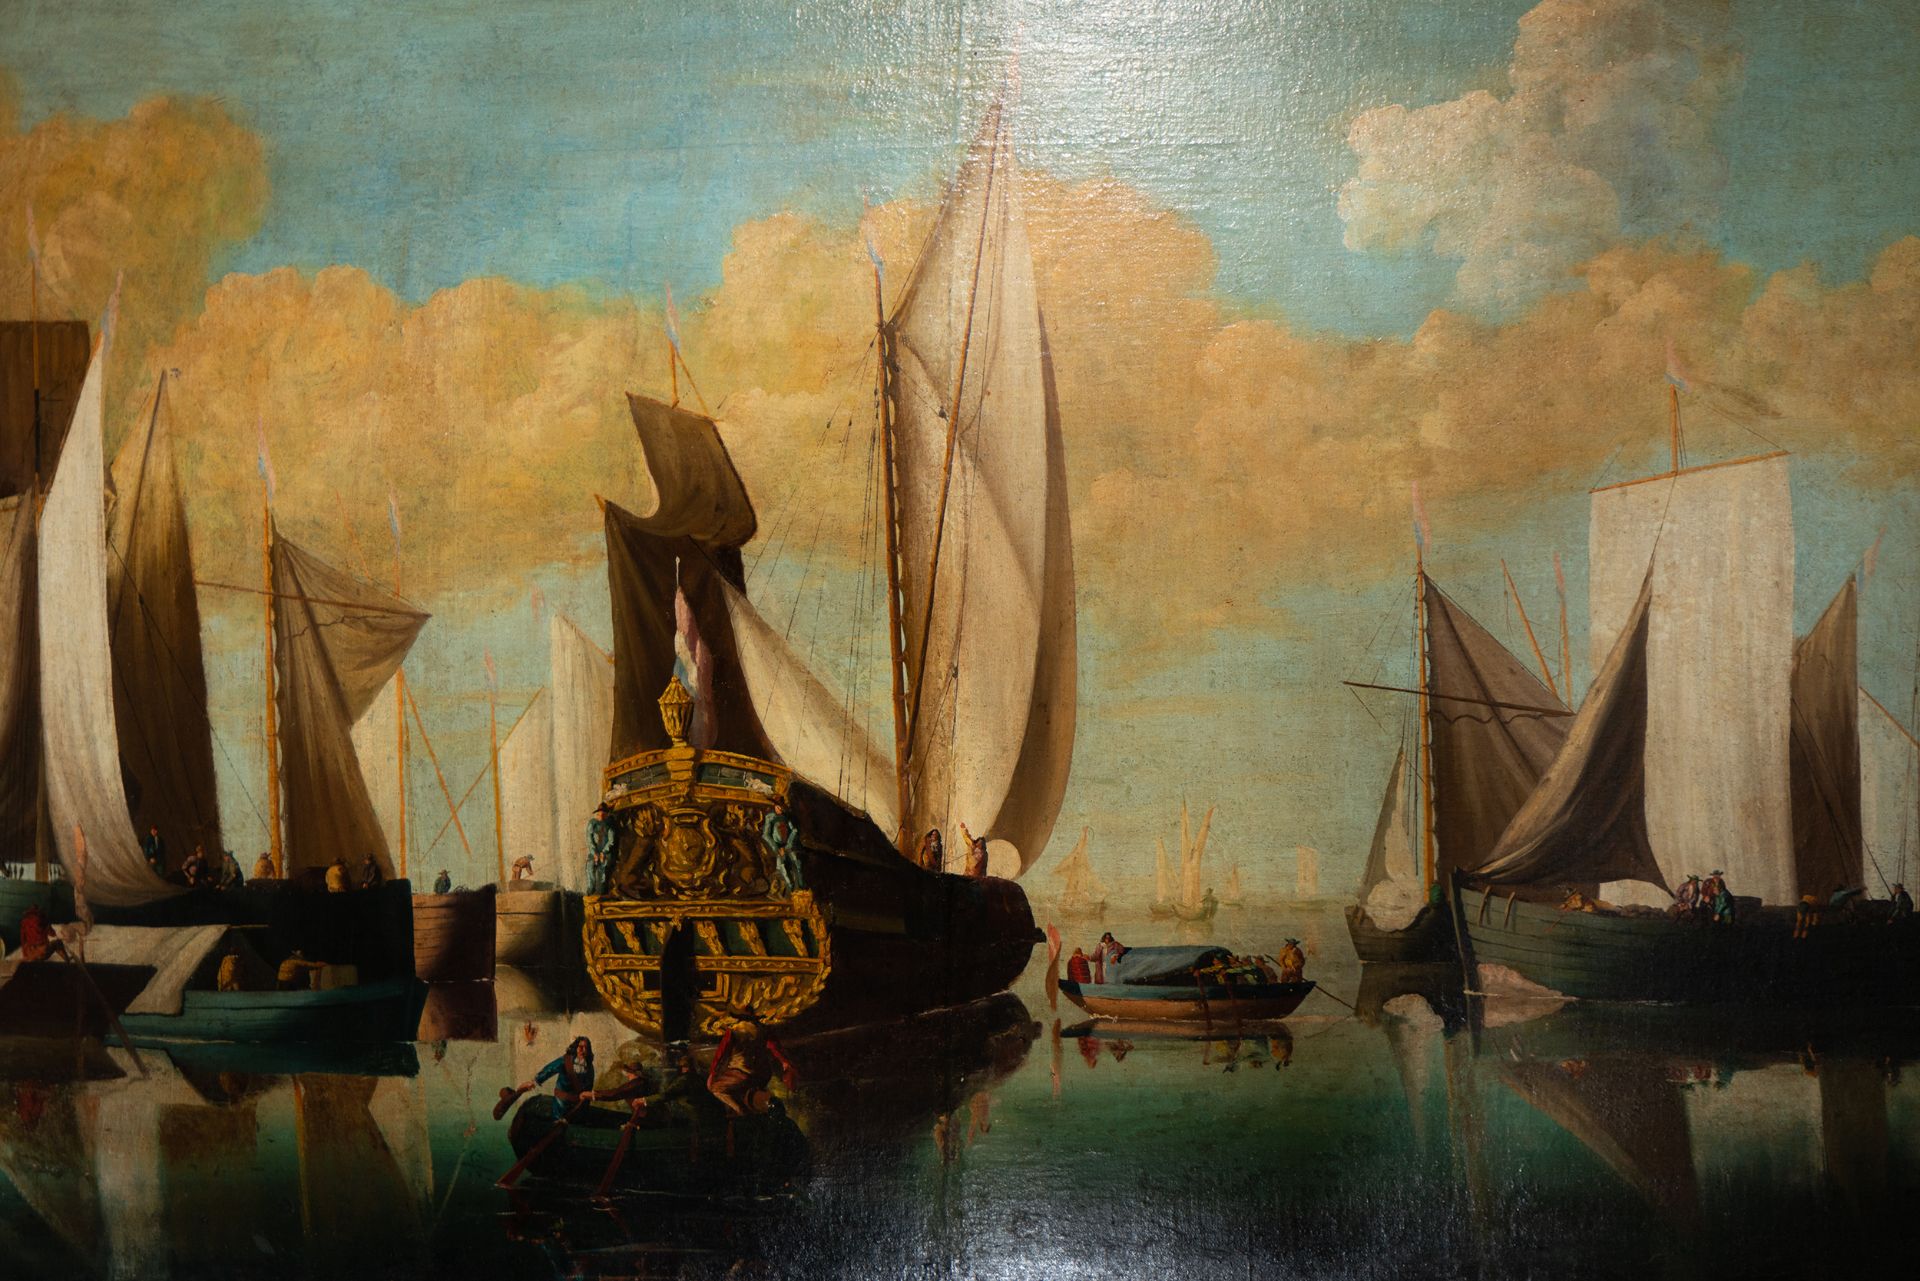 Marina with Spanish Galleon, Valencian school of the 19th century - Image 2 of 5